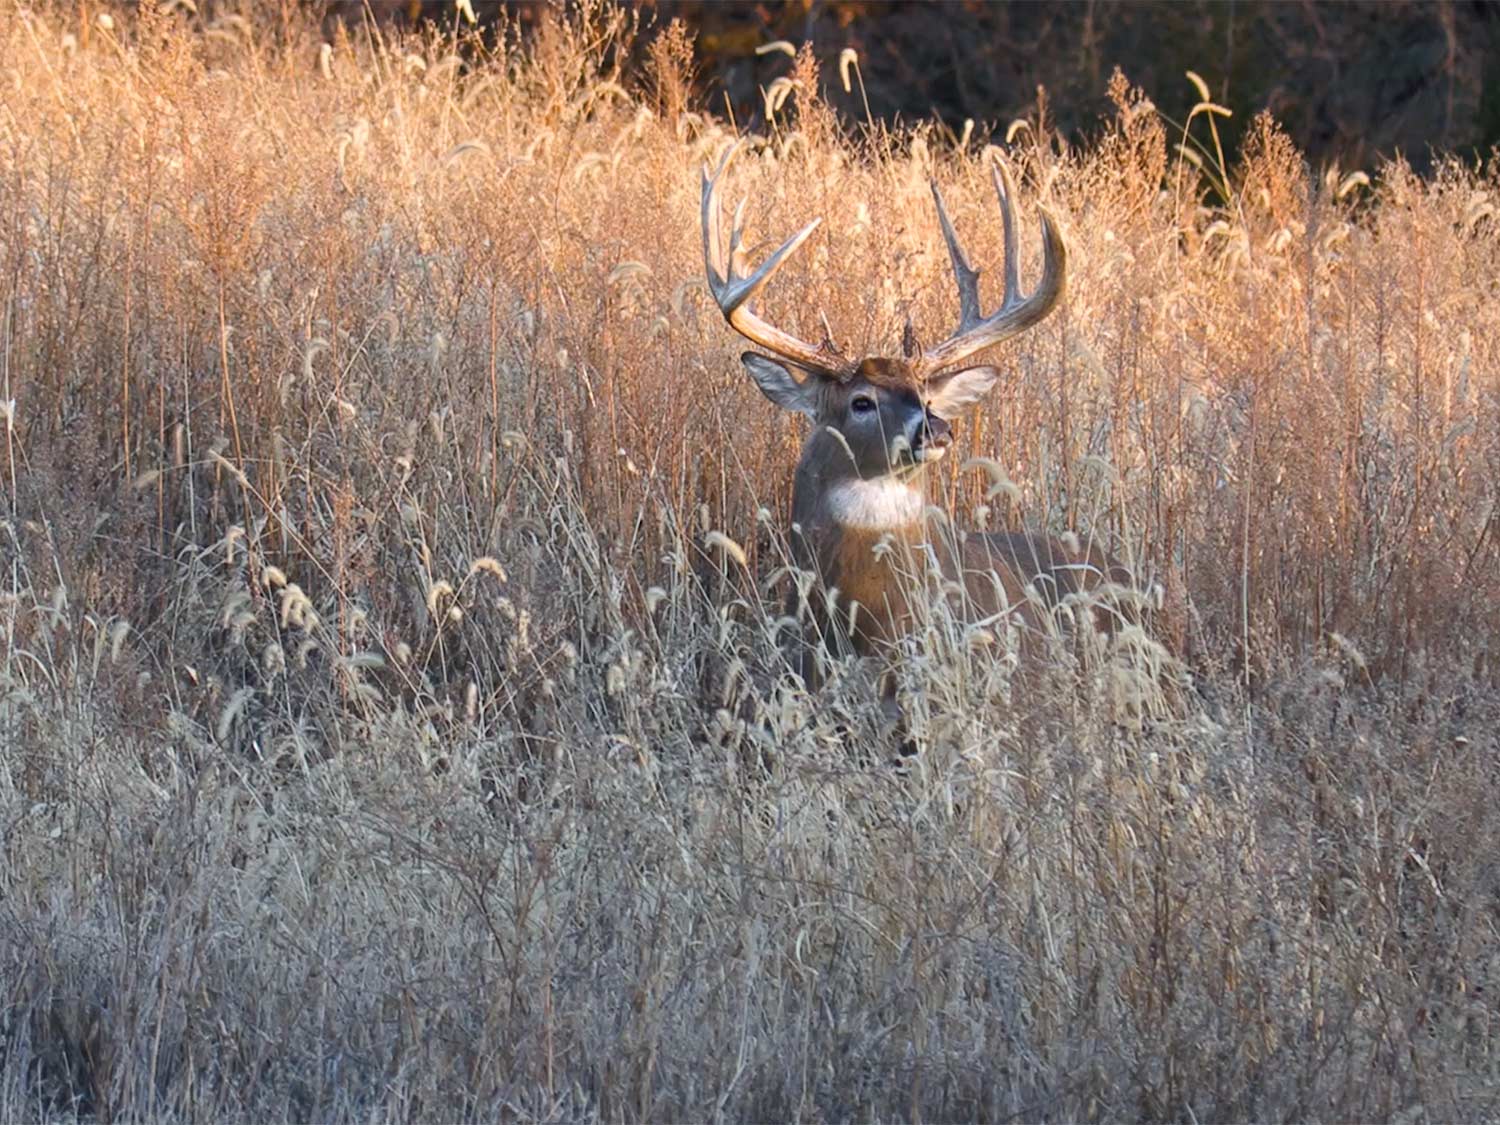 A whitetail deer sits in a field of tall grass.